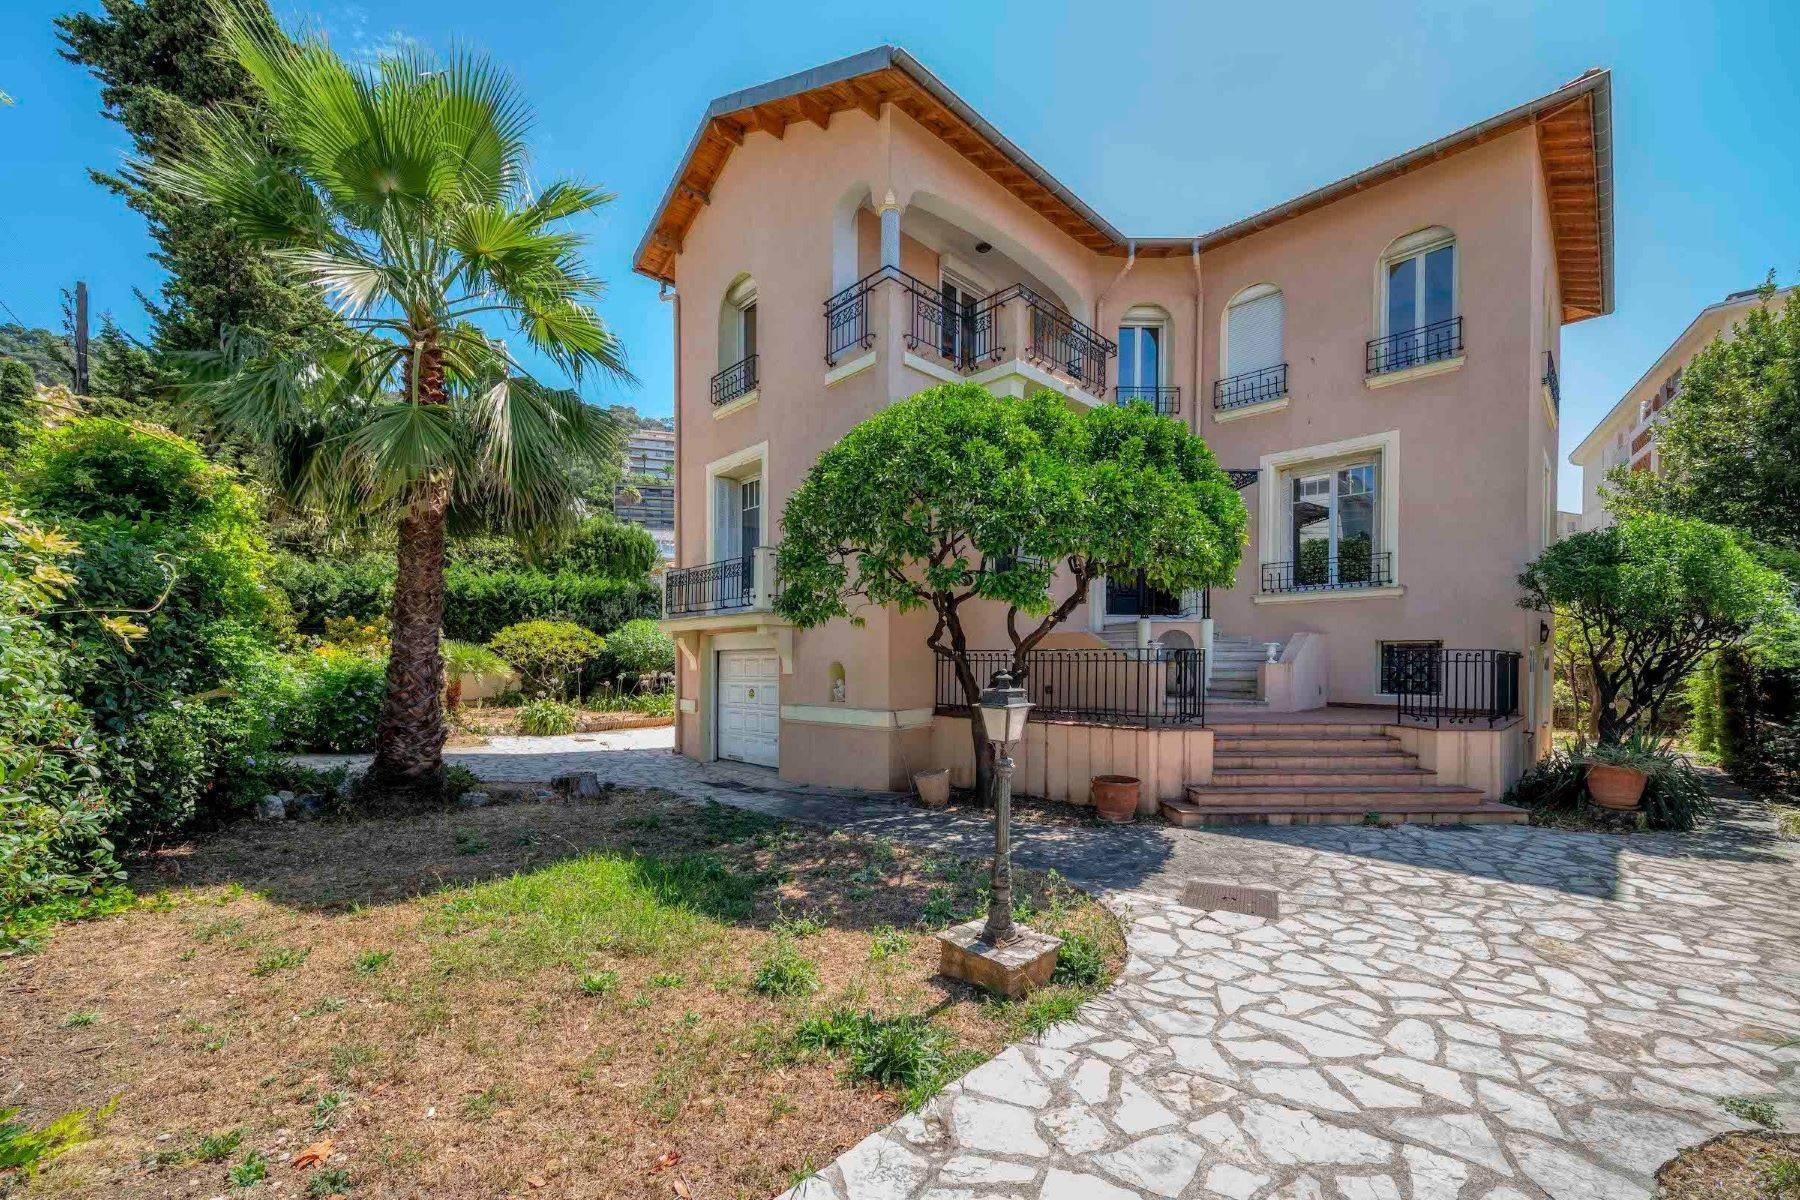 Single Family Homes for Sale at Nice Le Port - Epoque villa in secure domain Nice Le Port - Epoque villa in secure domain, Nice, Provence-Alpes-Cote D'Azur 06300 France